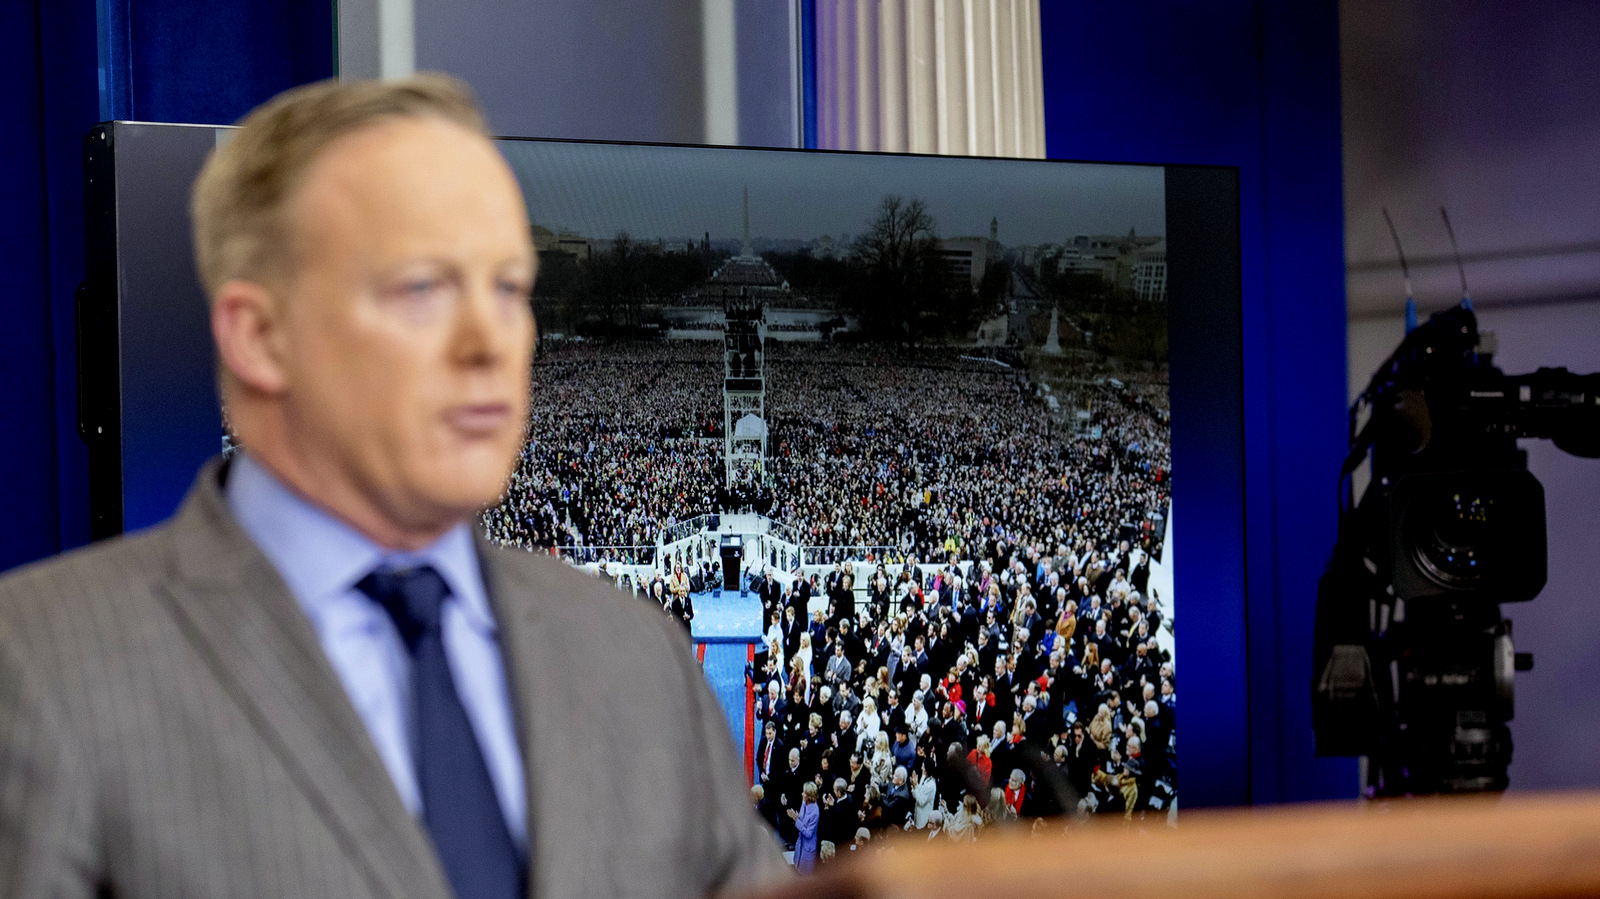 An image of the inauguration of President Donald Trump is displayed behind White House press secretary Sean Spicer as he speaks at the White House, Saturday, Jan. 21, 2017, in Washington. (AP/Andrew Harnik)